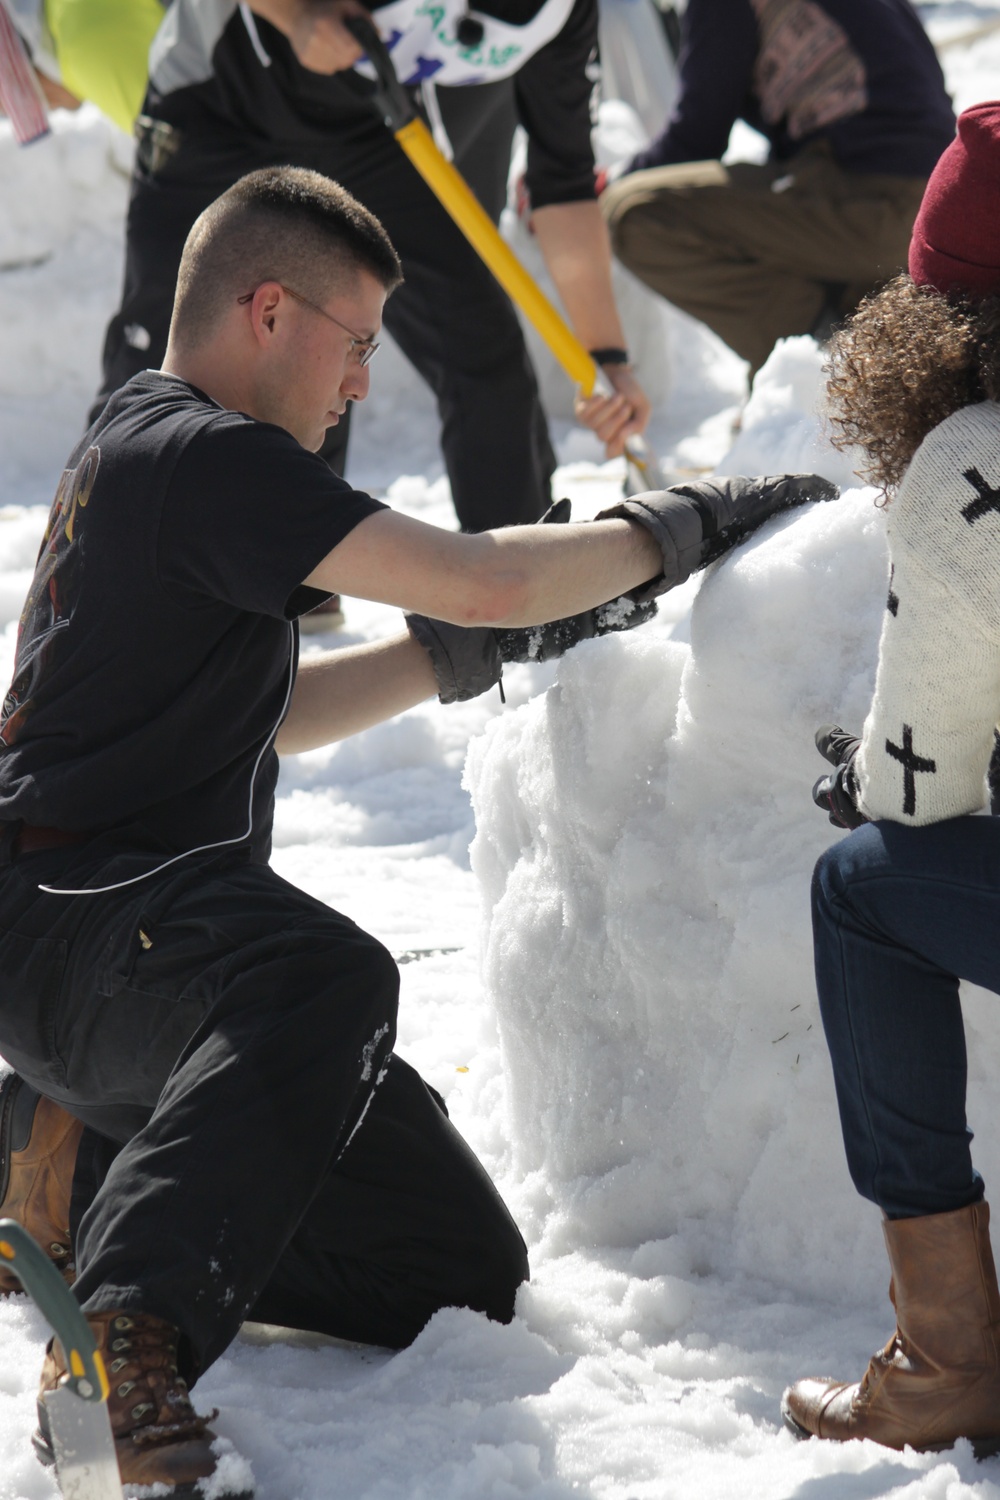 CLC-36 Marines compete in First World Igloo Building Championship